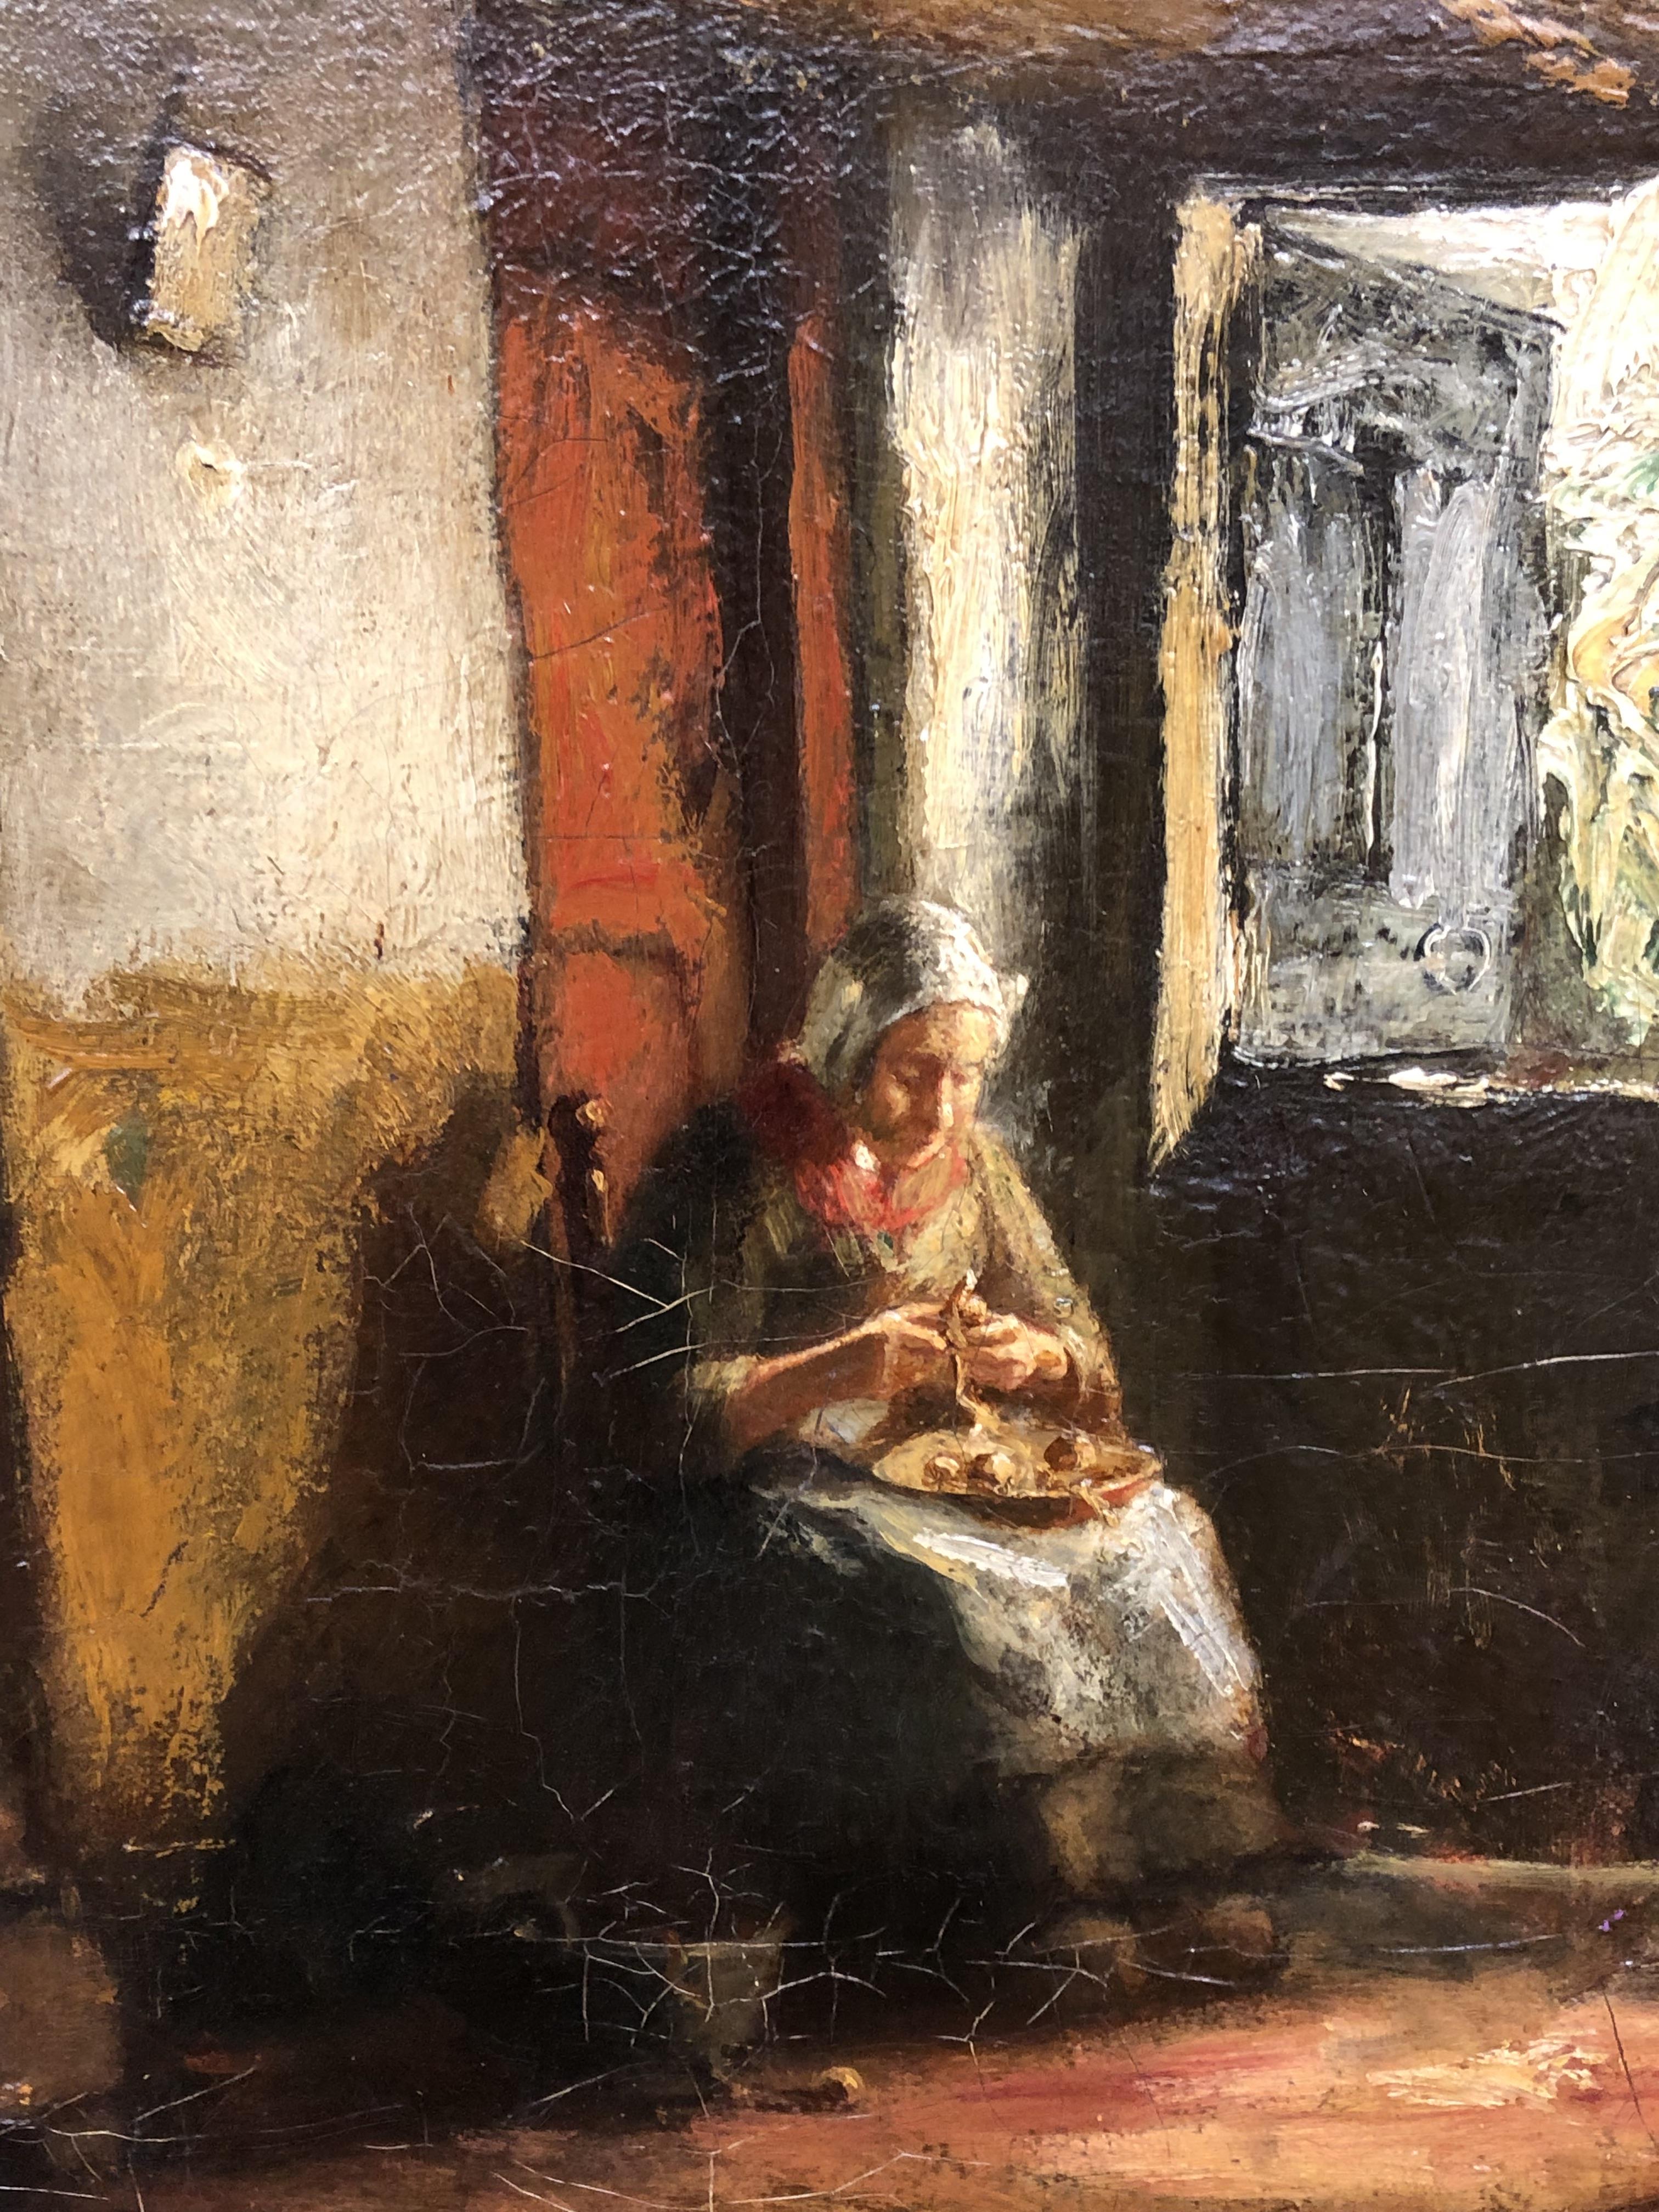 19TH CENTURY DUTCH SCHOOL- OIL ON CANVAS OF A SEATED ELDERLY LADY PEELING POTATOES IN AN INTERIOR - Image 4 of 5